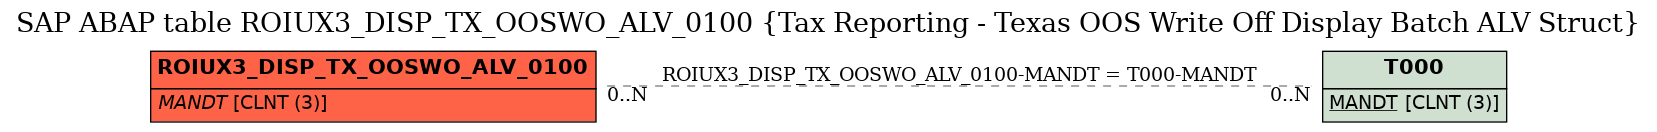 E-R Diagram for table ROIUX3_DISP_TX_OOSWO_ALV_0100 (Tax Reporting - Texas OOS Write Off Display Batch ALV Struct)